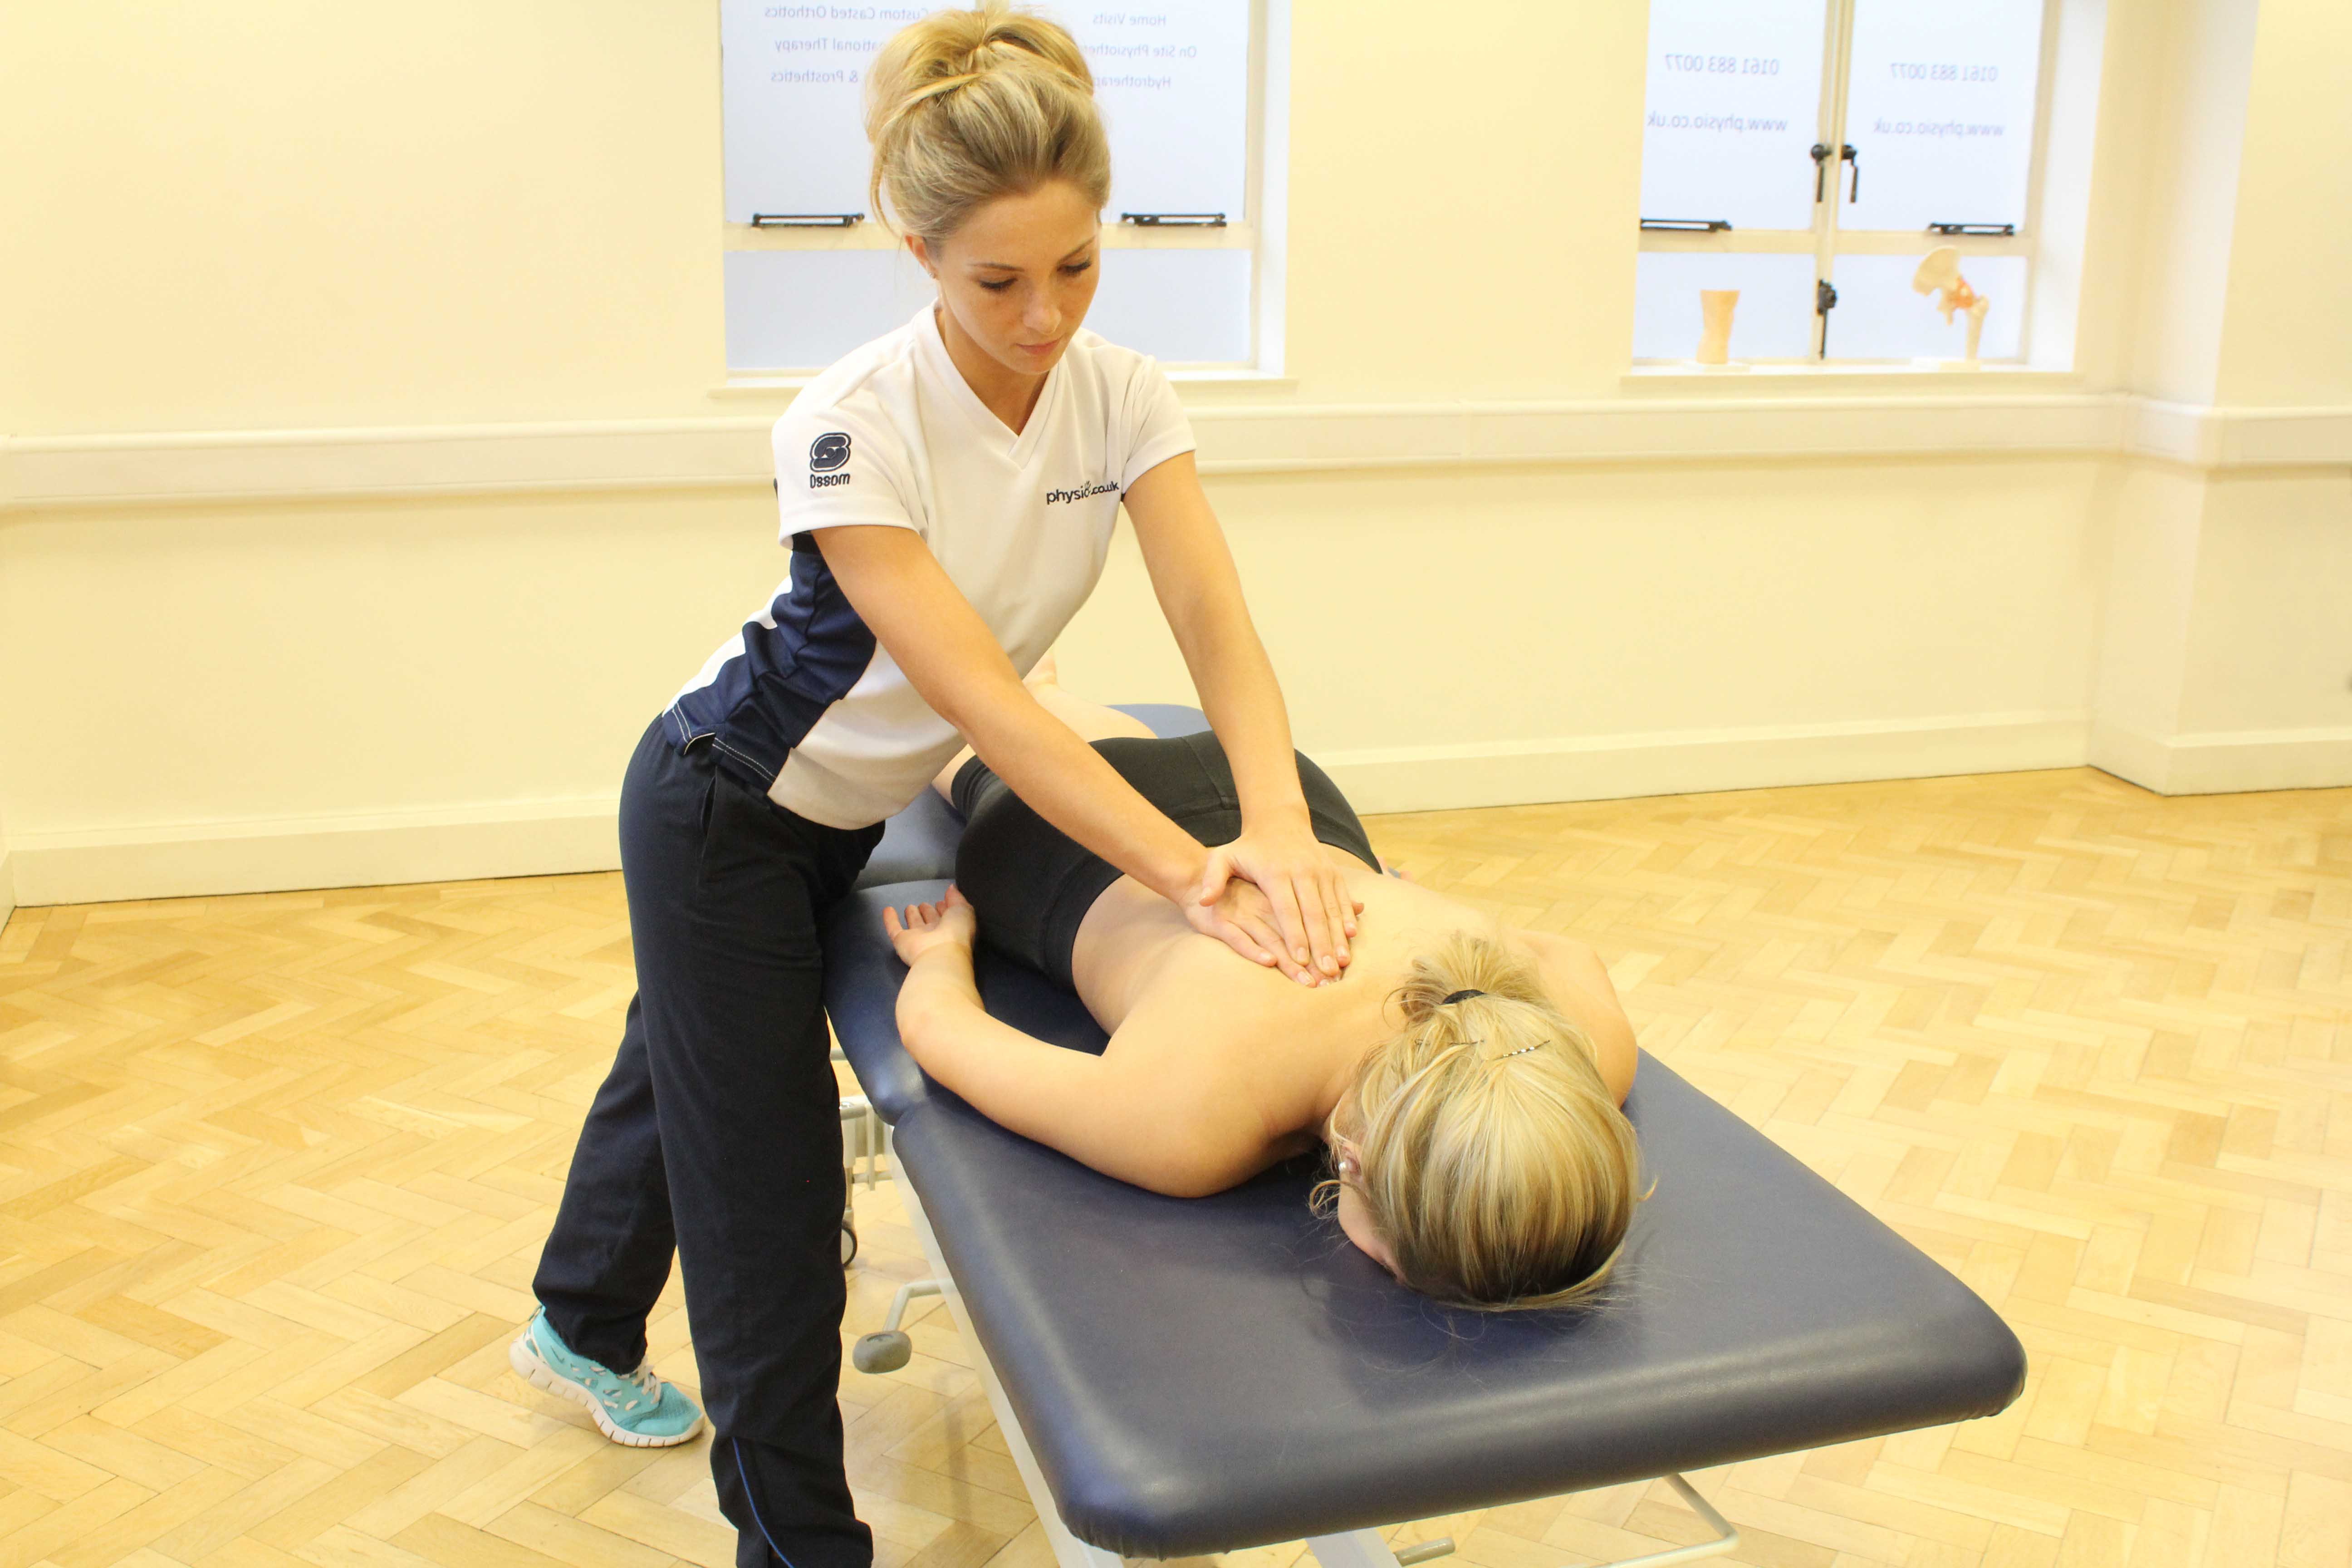 Soft tissue massage of the upper back muscles